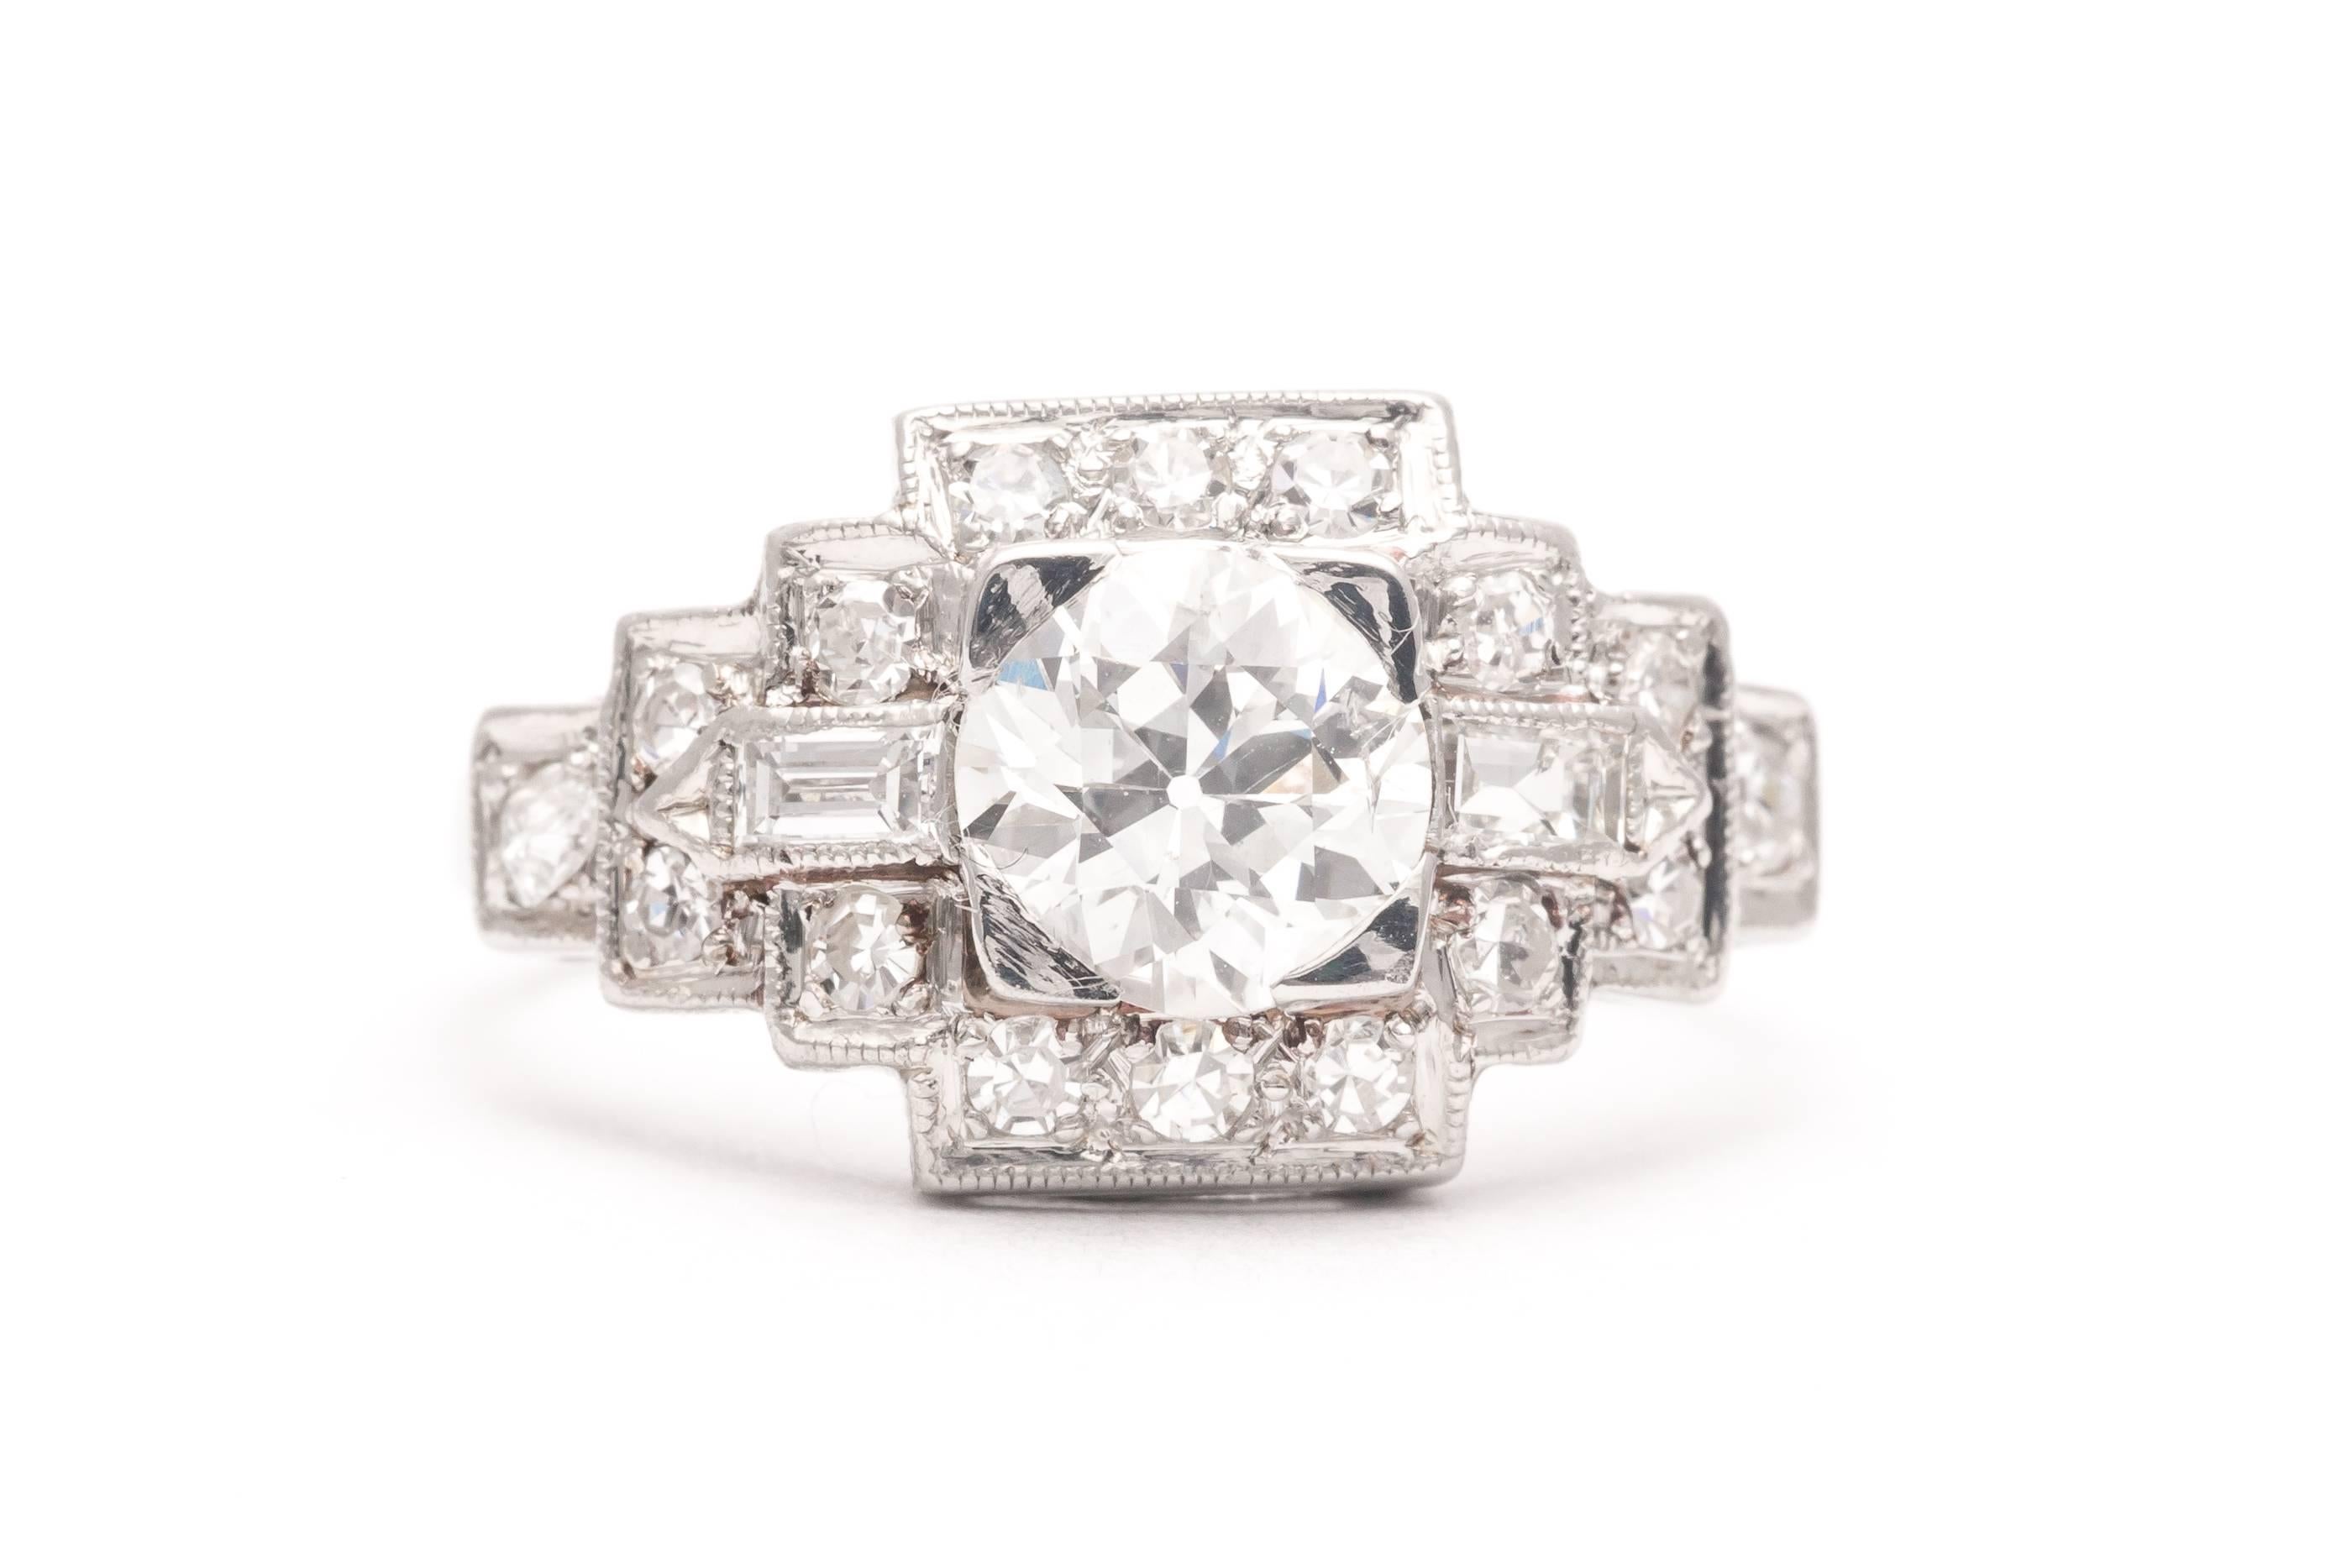 A classic art deco diamond engagement ring in luxurious platinum. Centered by a 0.85 carat old European cut diamond, this ring features a classic stepped design set throughout with accenting European and baguette cut diamonds in a handmade platinum